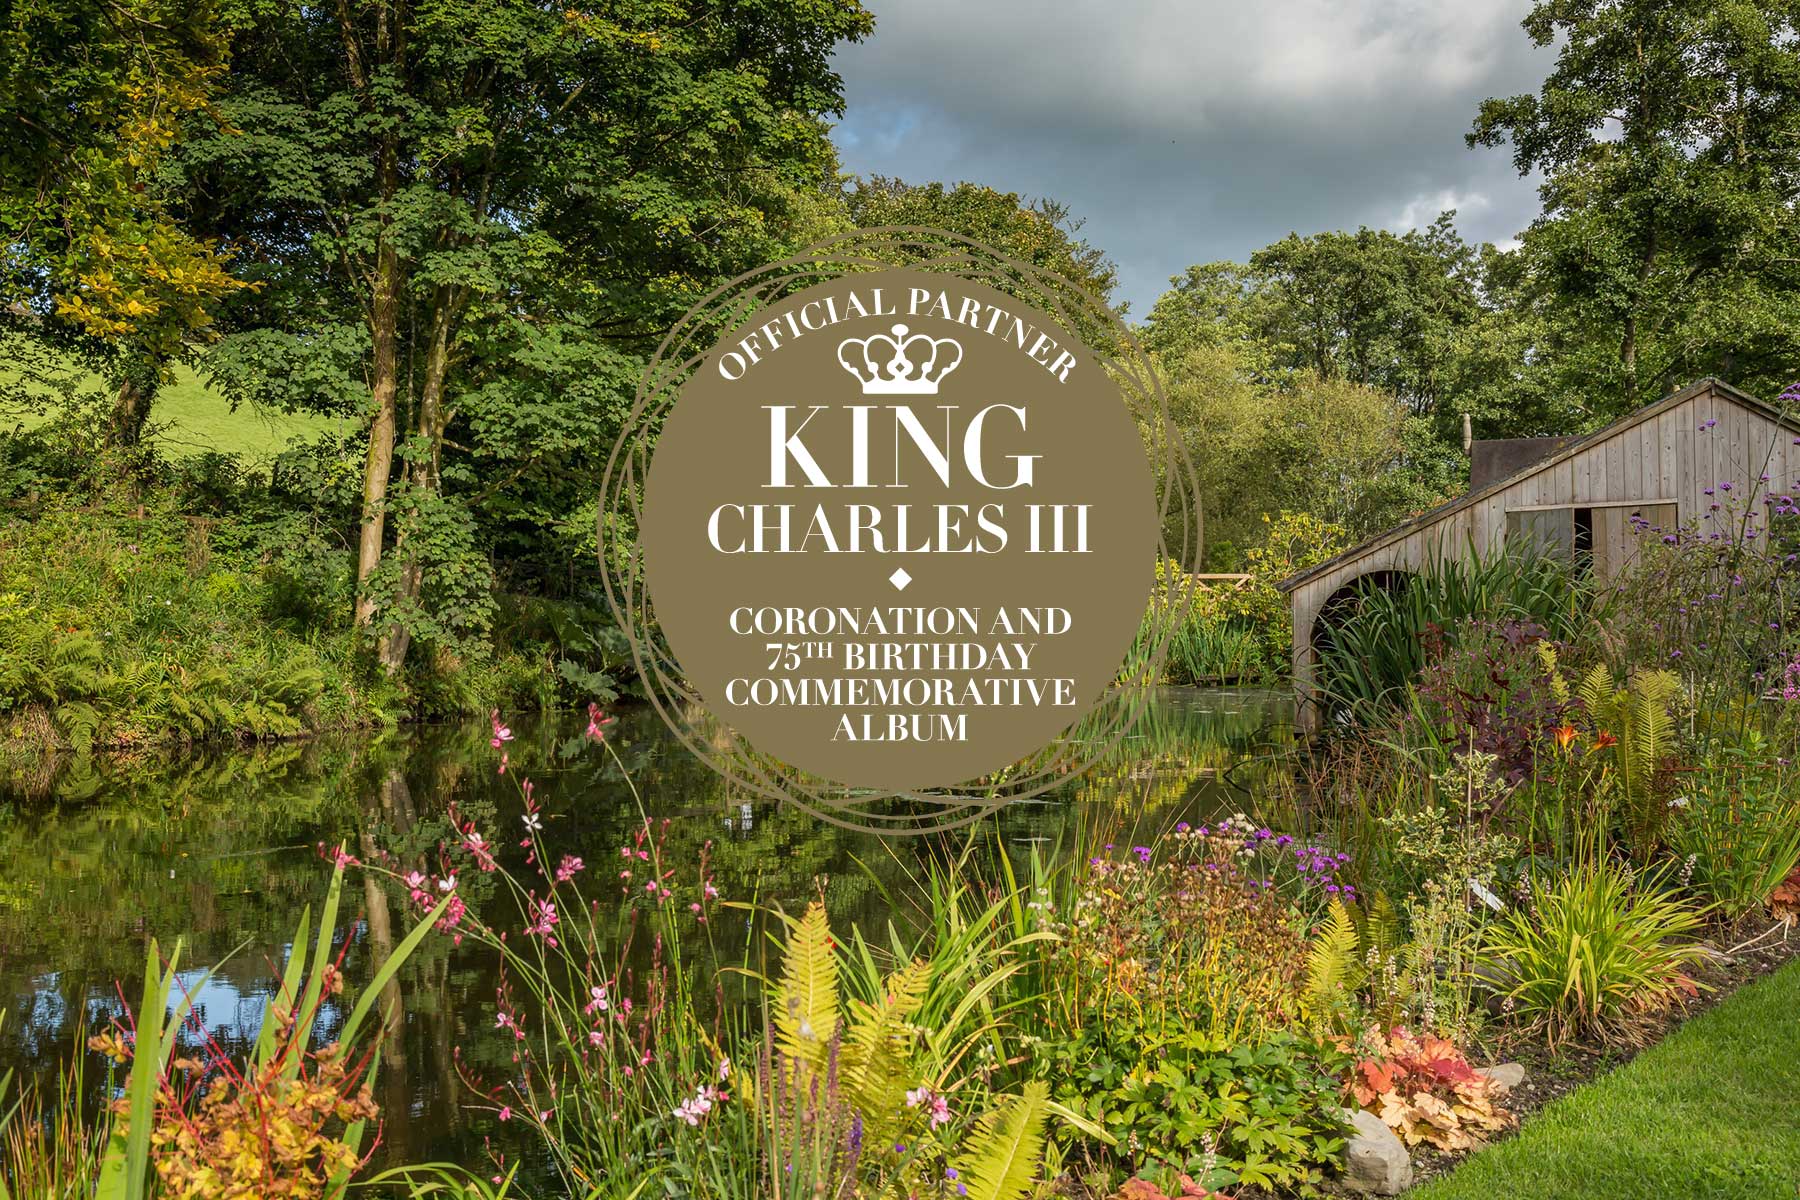 King Charles III Coronation and 75th birthday commemorative album official partner logo set against a beautifully planted garden at the side of a mill pond